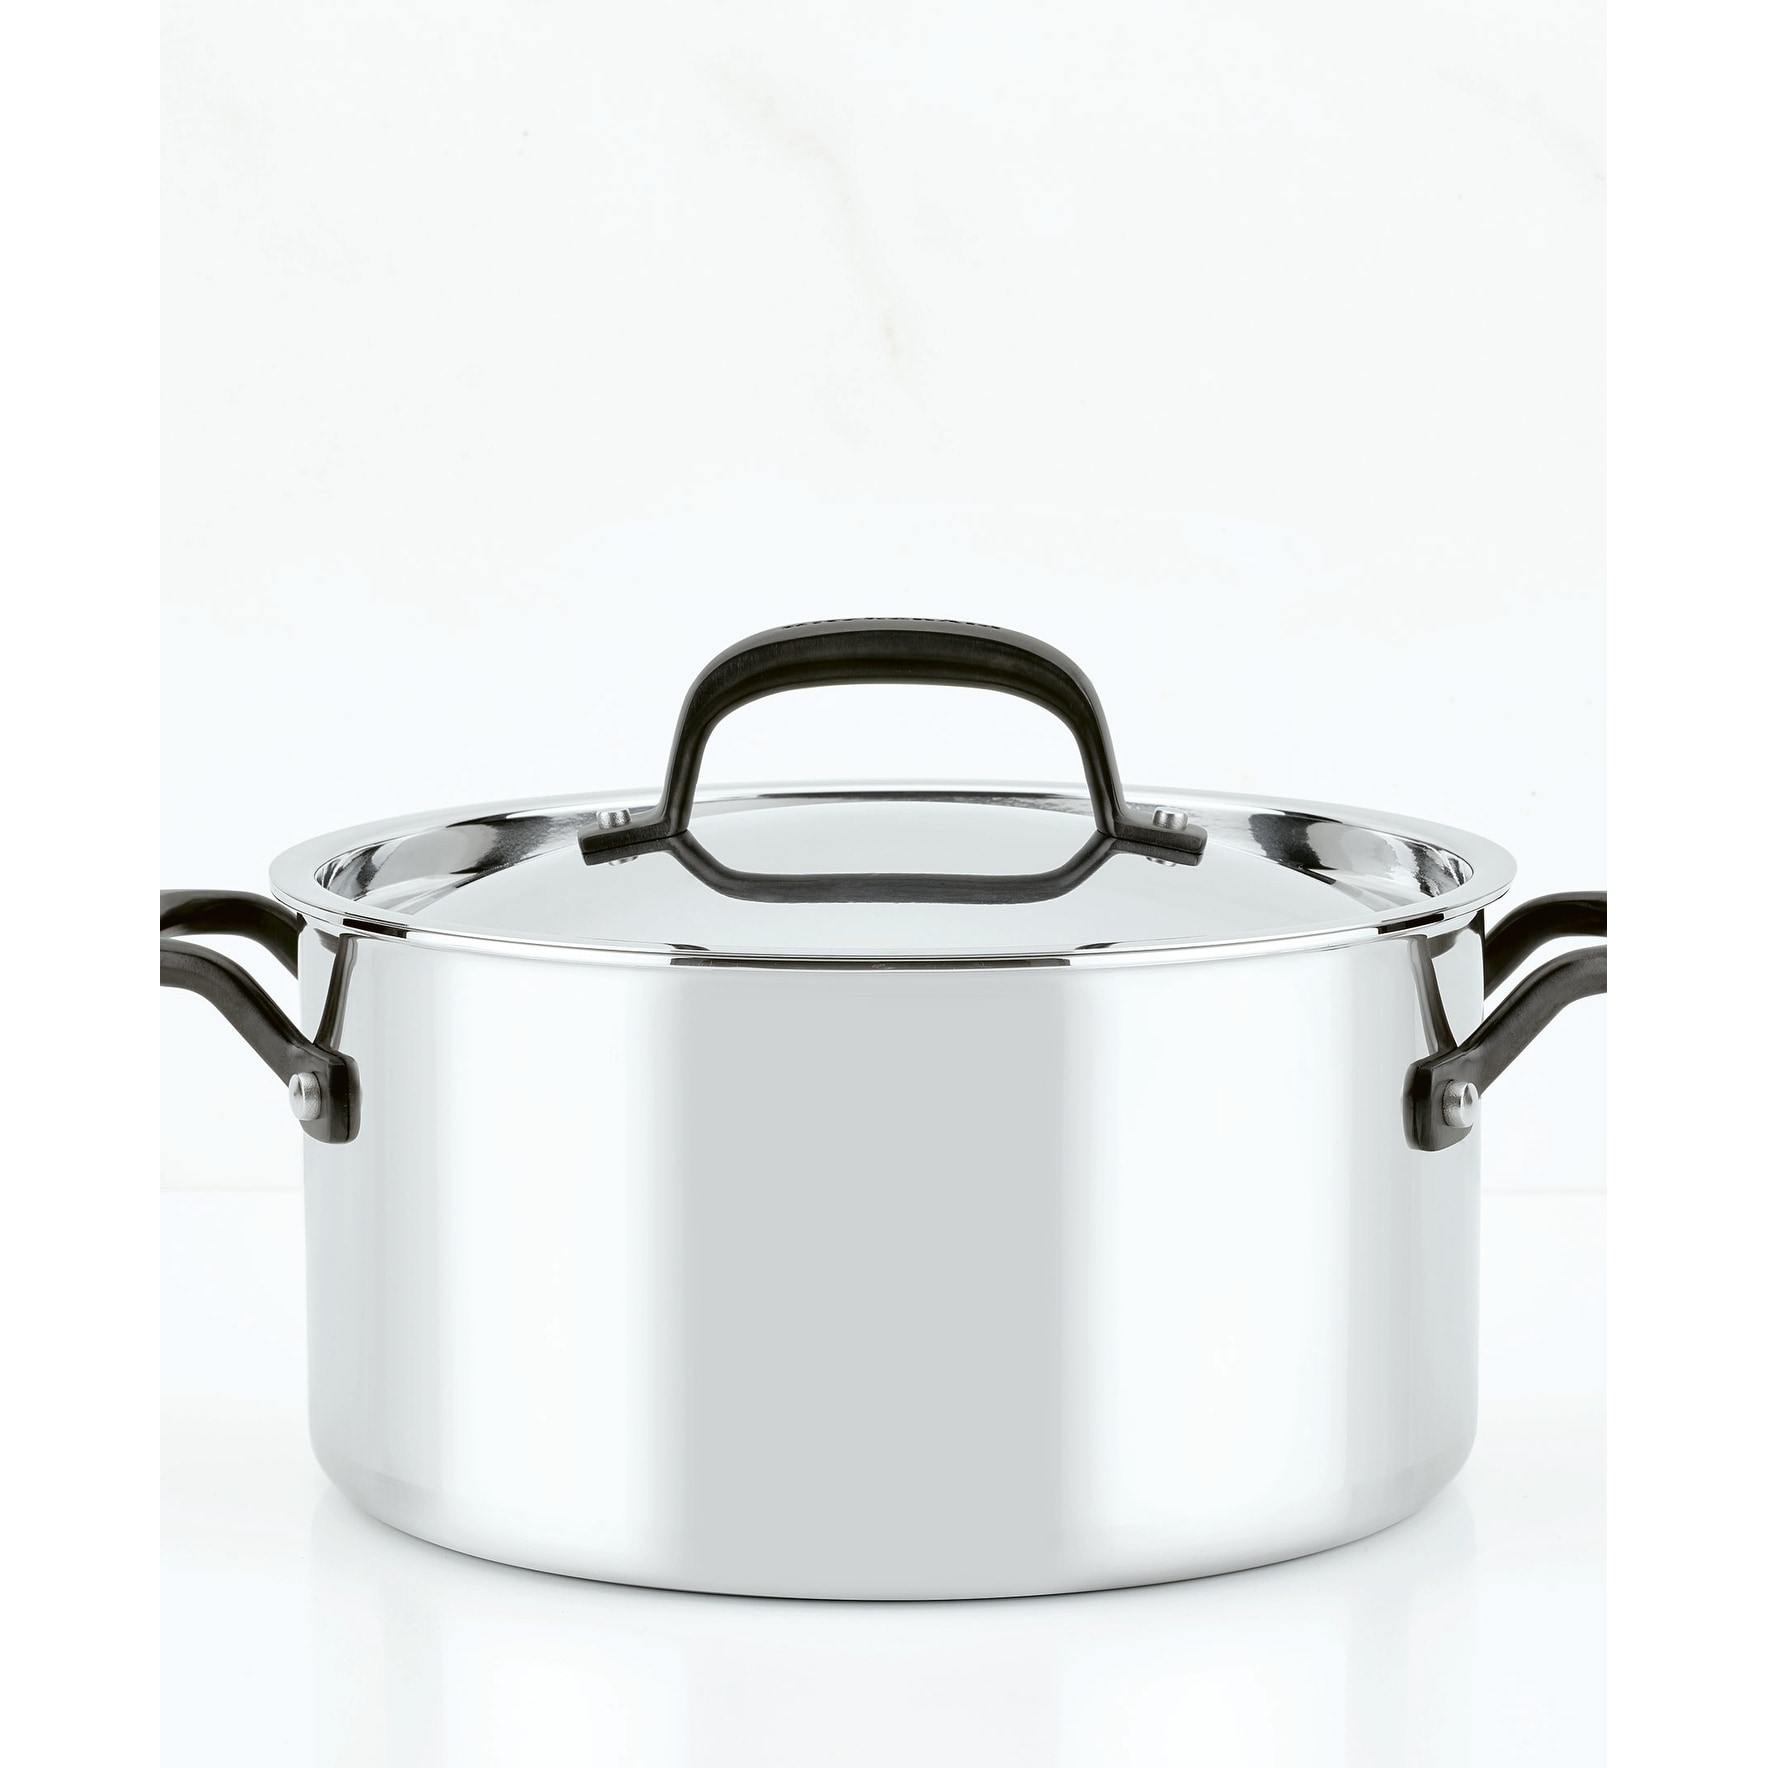 Kitchenaid 5-Ply Clad Stainless Steel Stockpot With Lid, 8-Quart